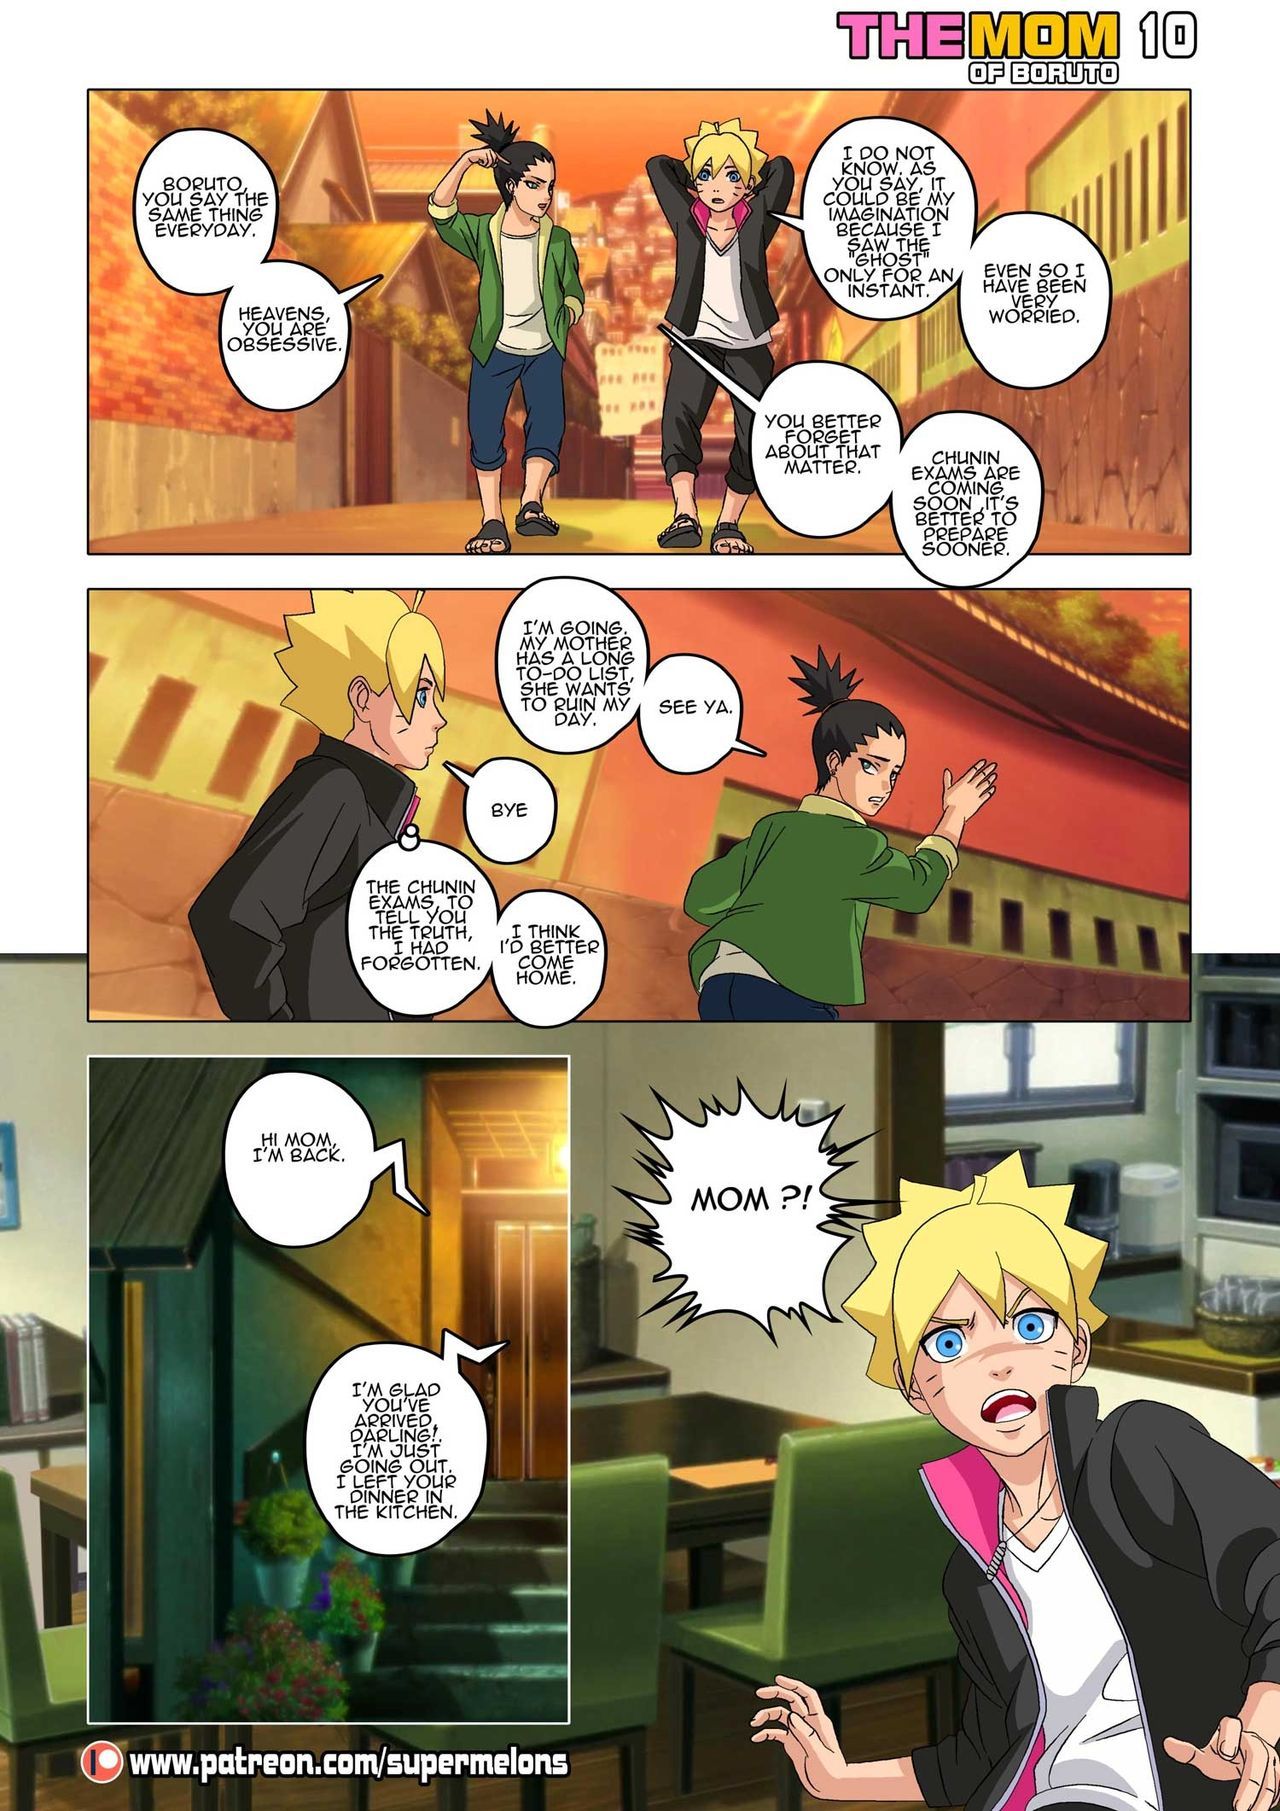 [Super Melons] The mom of Boruto [Ongoing] 11